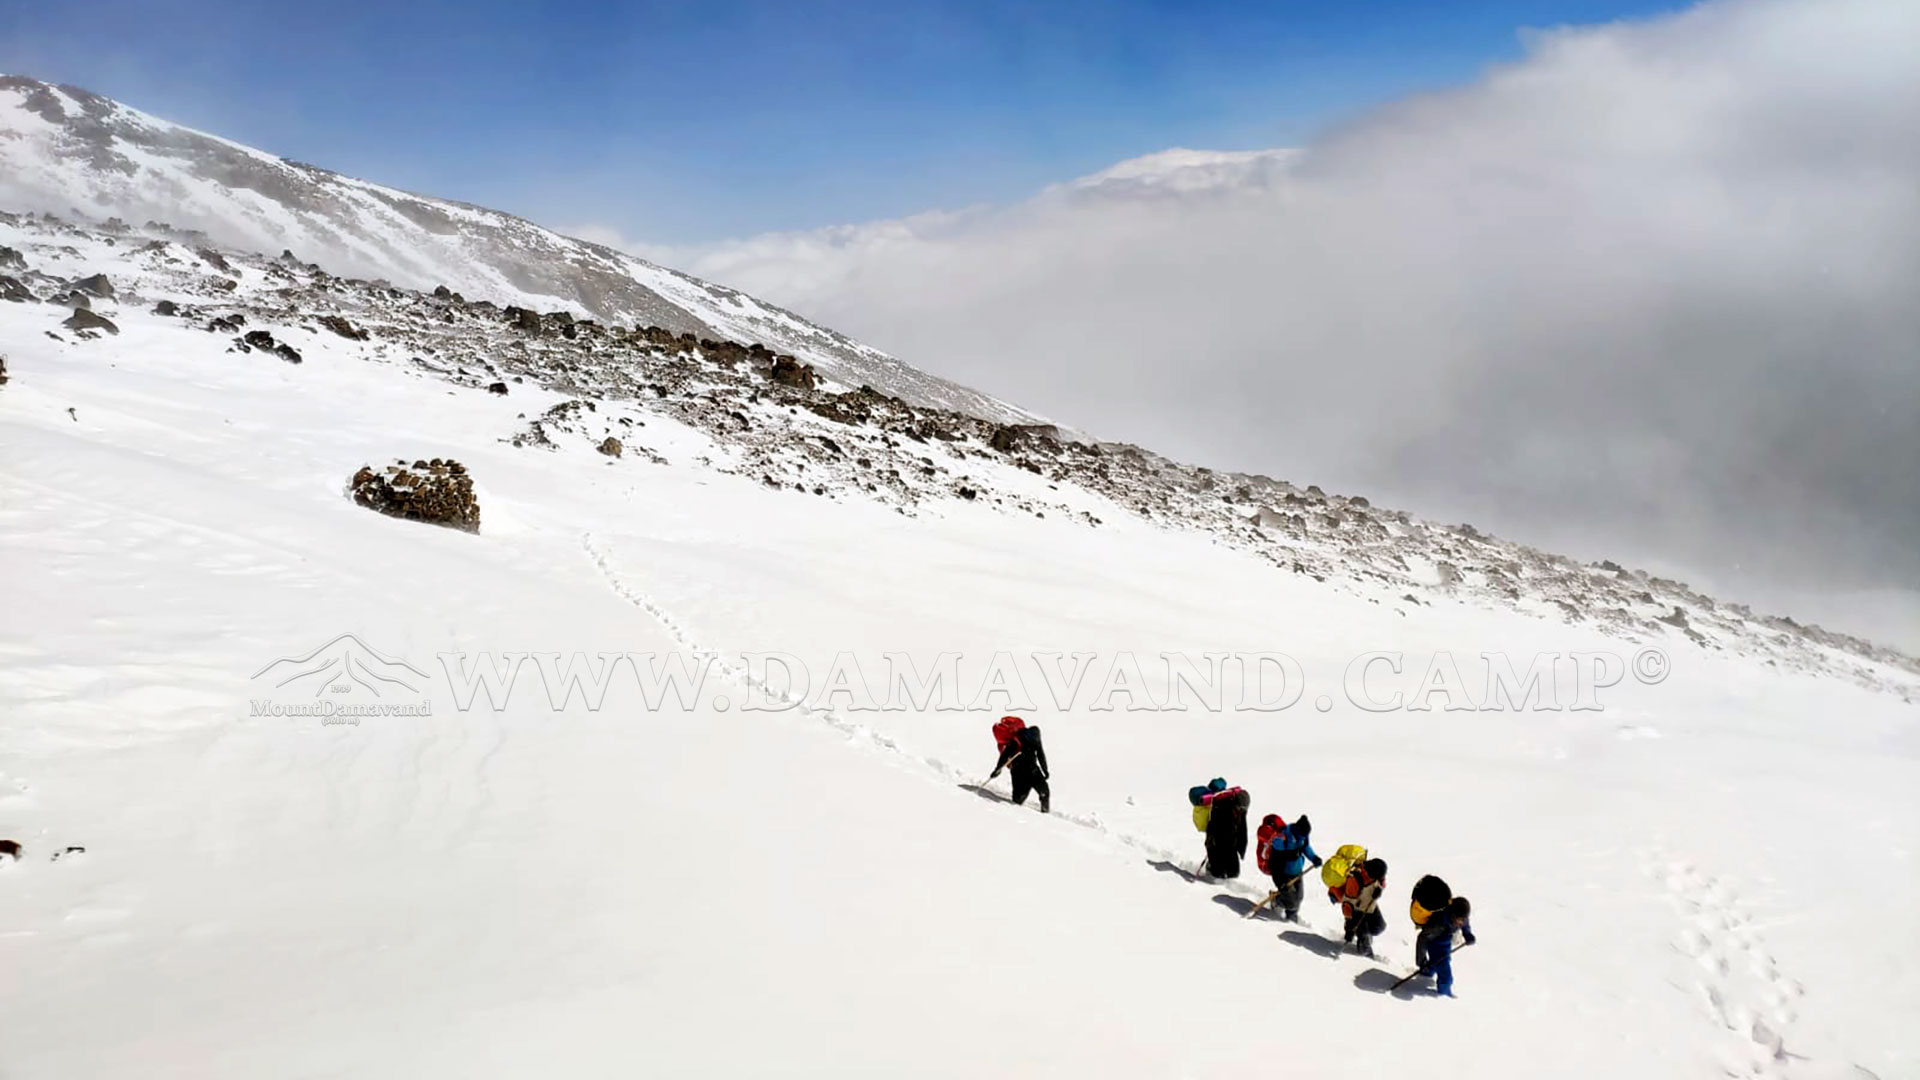 Hardworking porters are carrying duffel bags on a snow-covered slope to the camp.